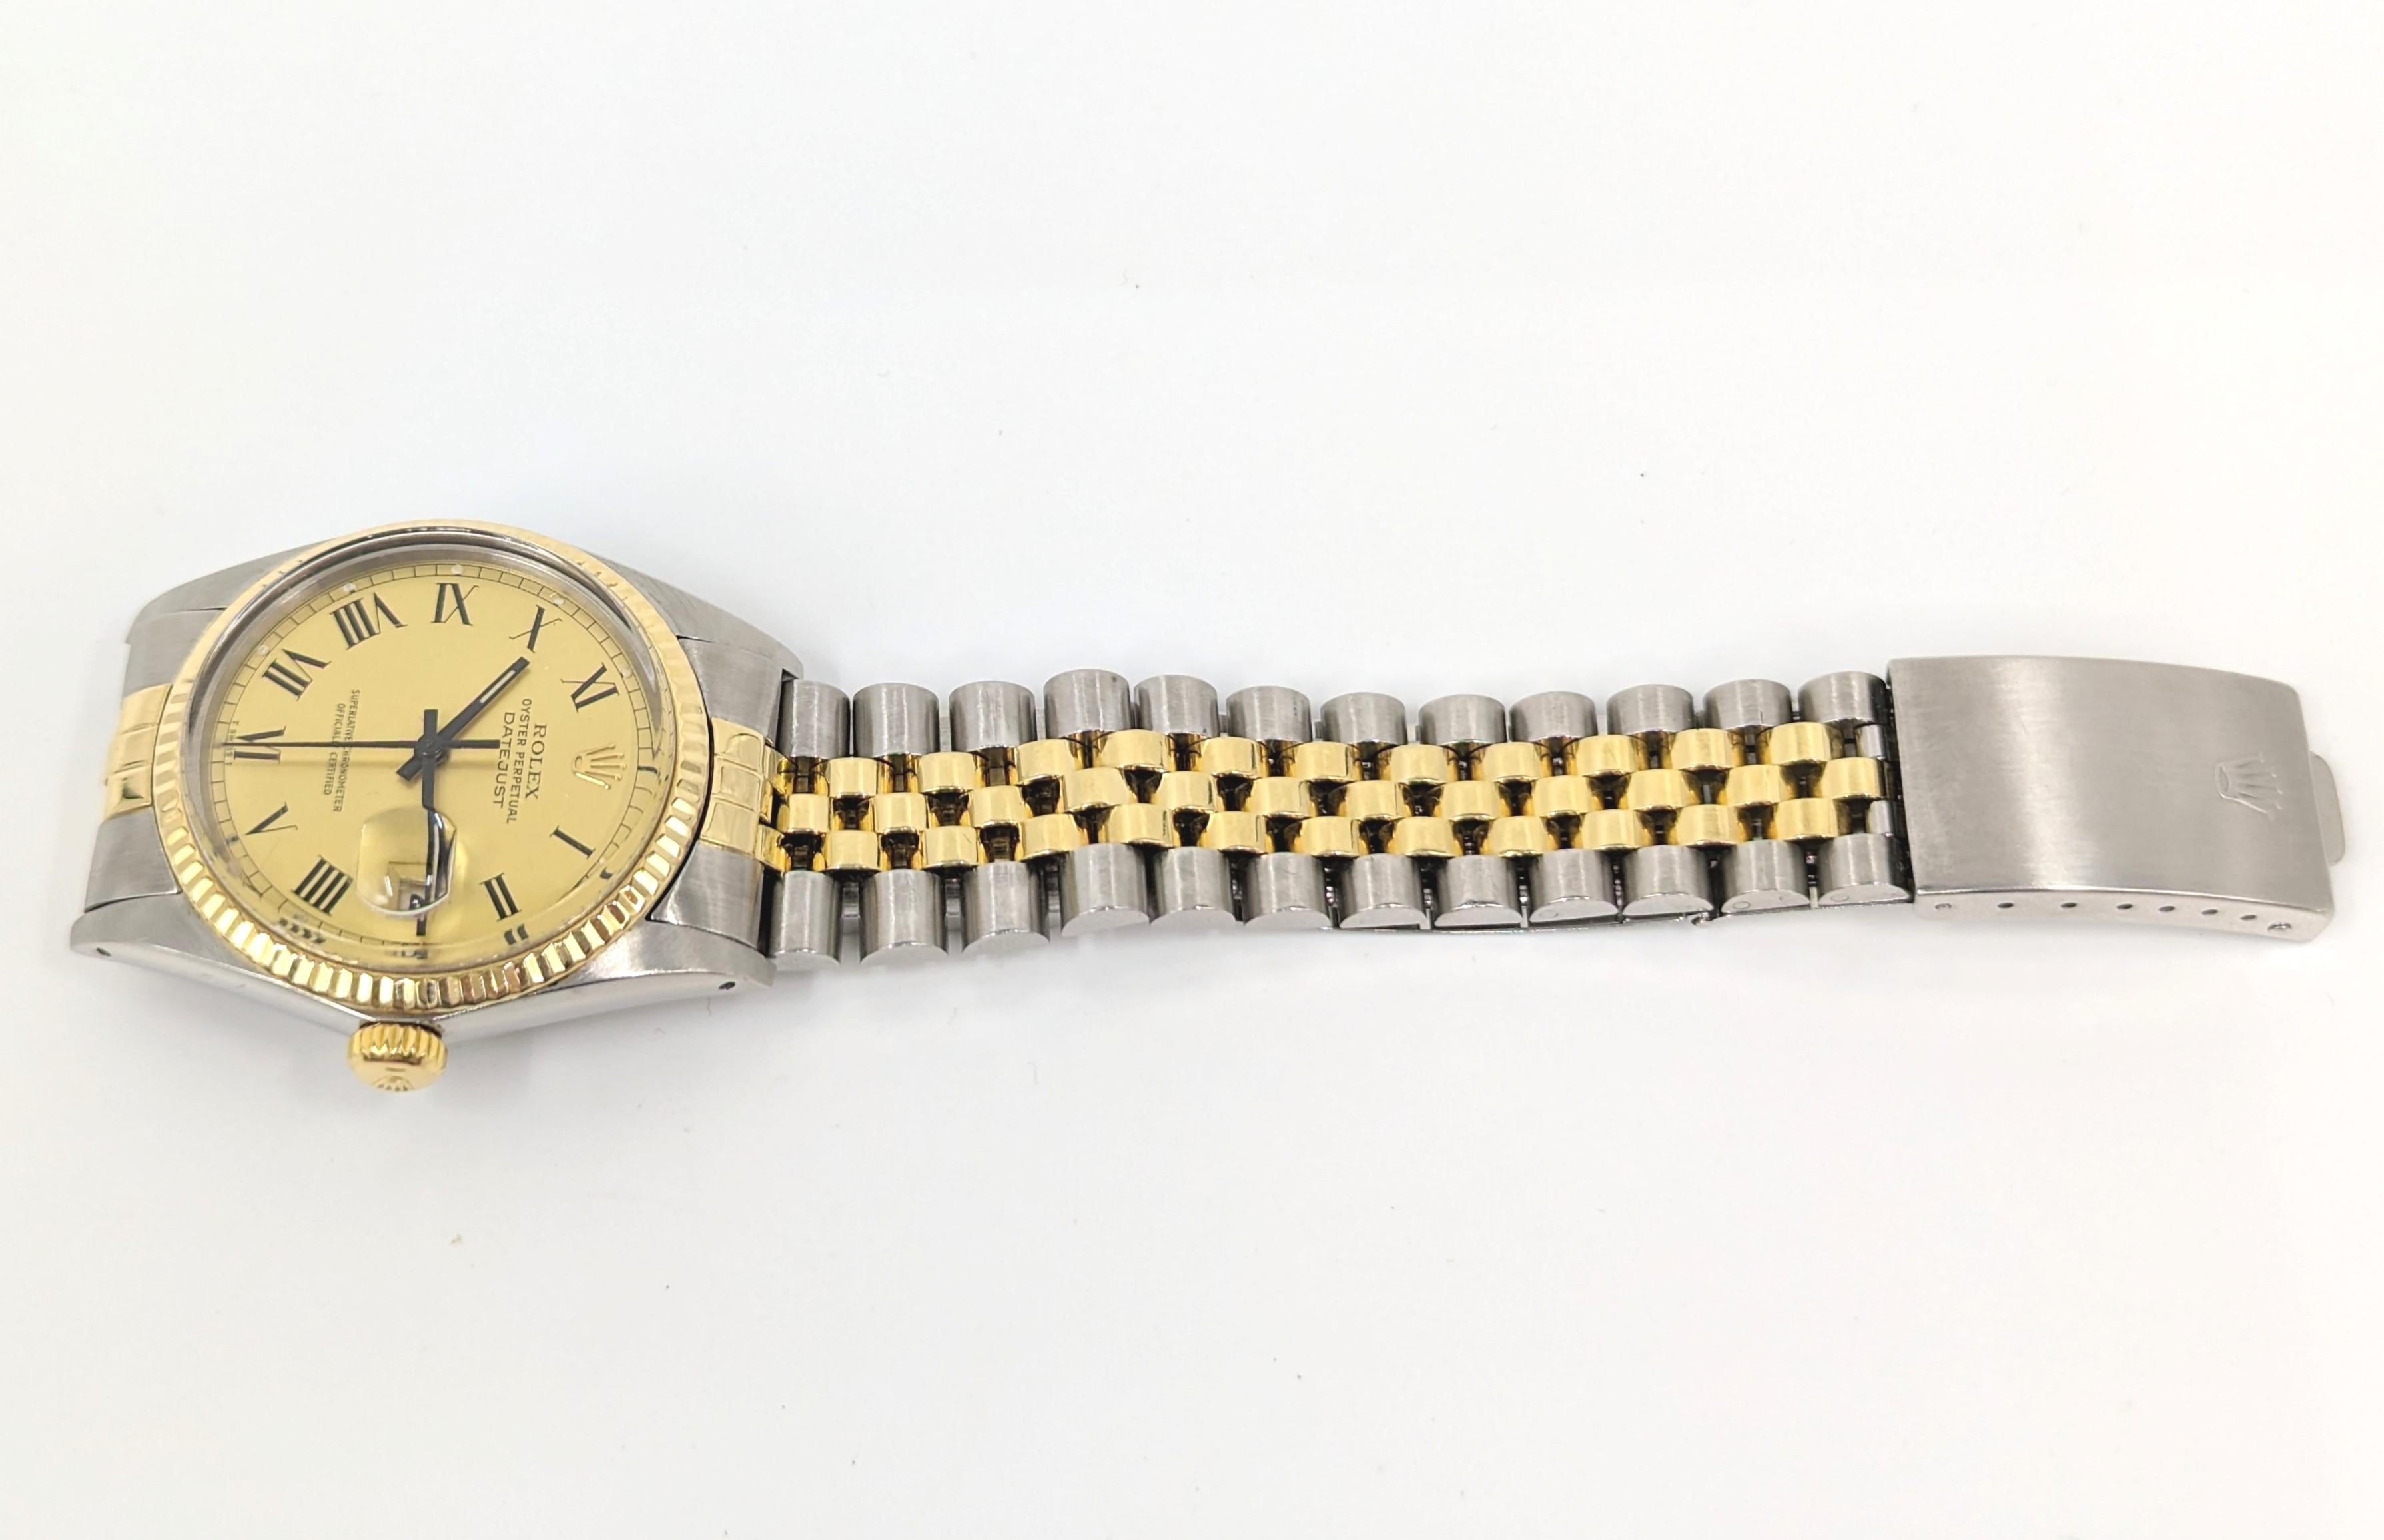 Rolex Oyster Perpetual Datejust 18k/SS YG 2tone Watch Collectible Buckley 16013 For Sale 2